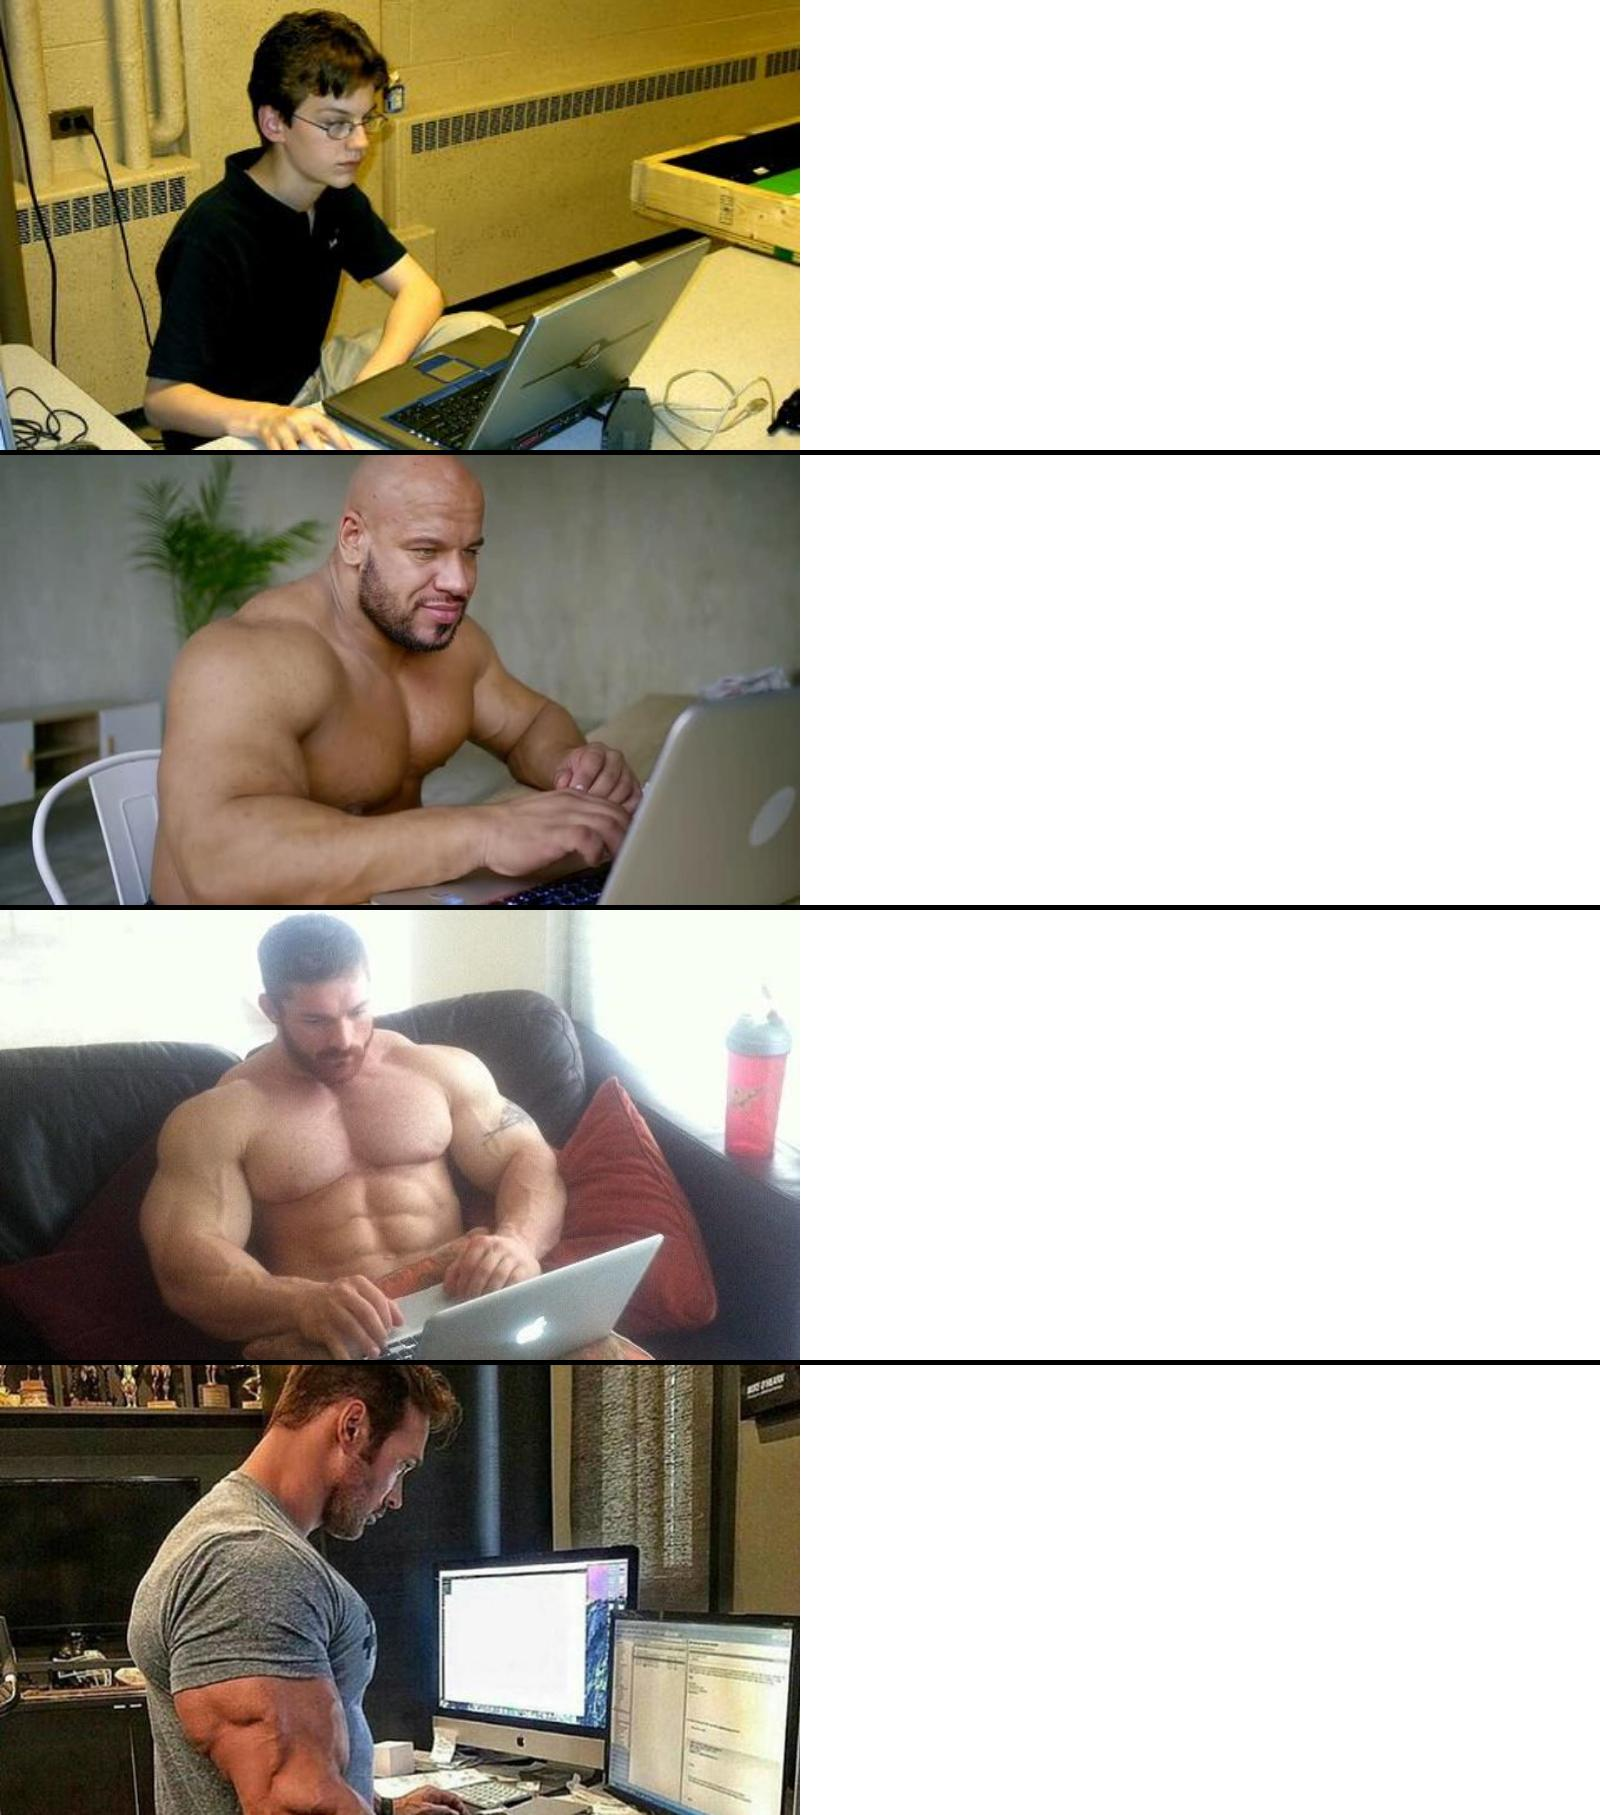 Create meme muscle get - Pictures 